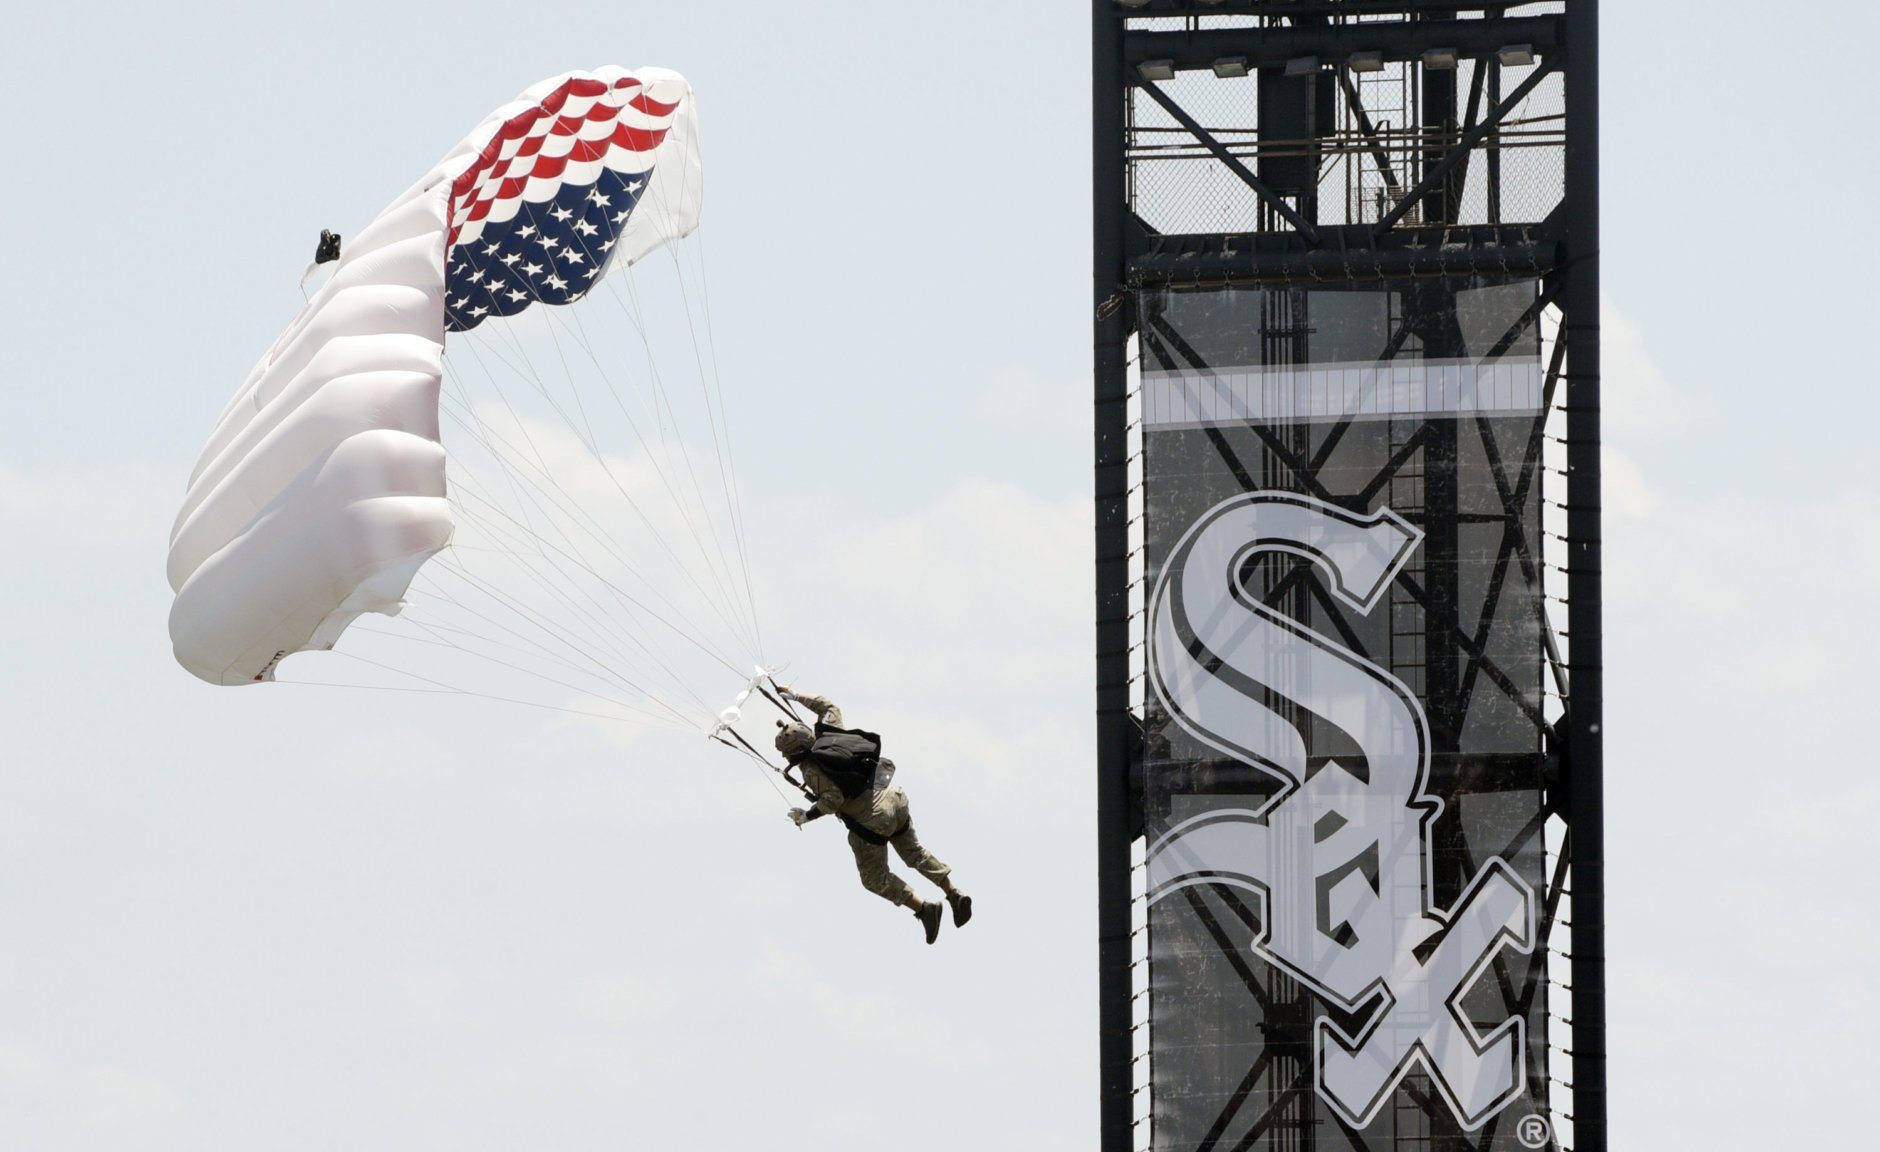 Frog-X parachute team member, retired U.S. Marine Marc Hogue glides toward the field before a baseball game between the Chicago White Sox and Detroit Tigers Thursday, July 4, 2019, in Chicago. (AP Photo/Mark Black)